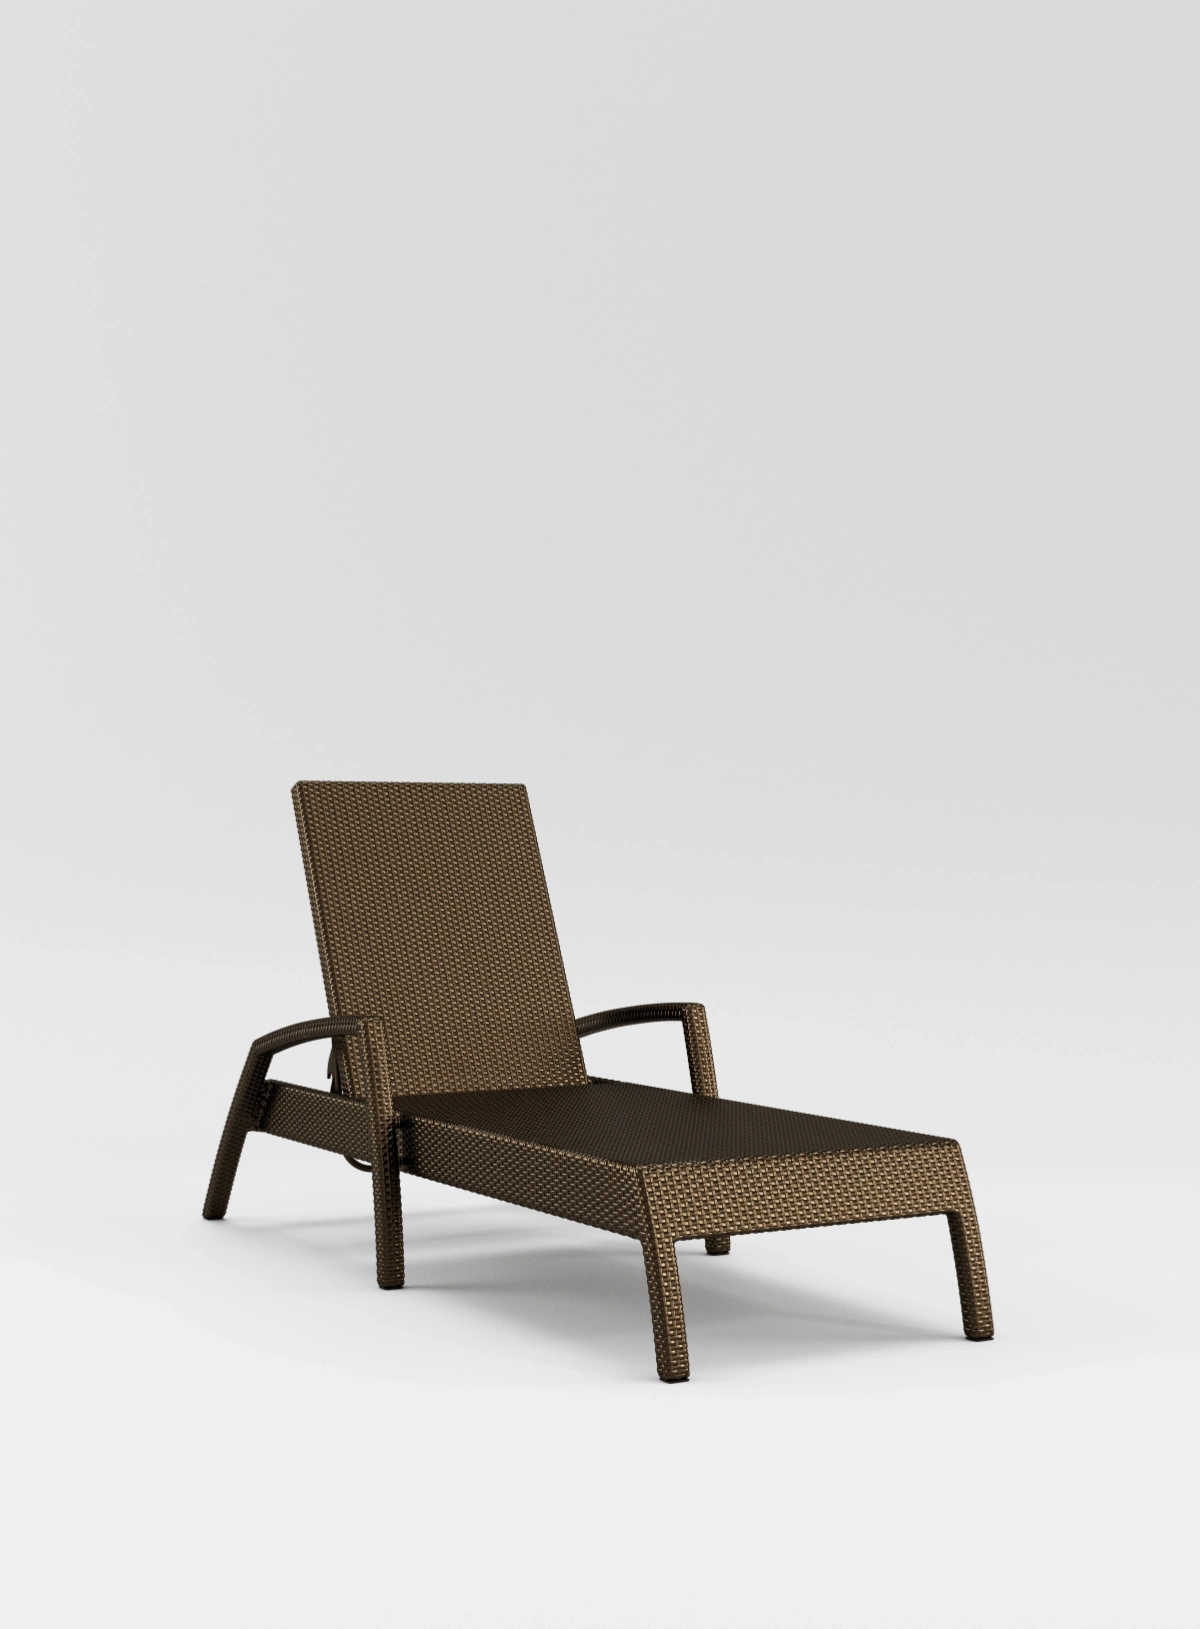 View All Chaise Lounges - Jordan Brown